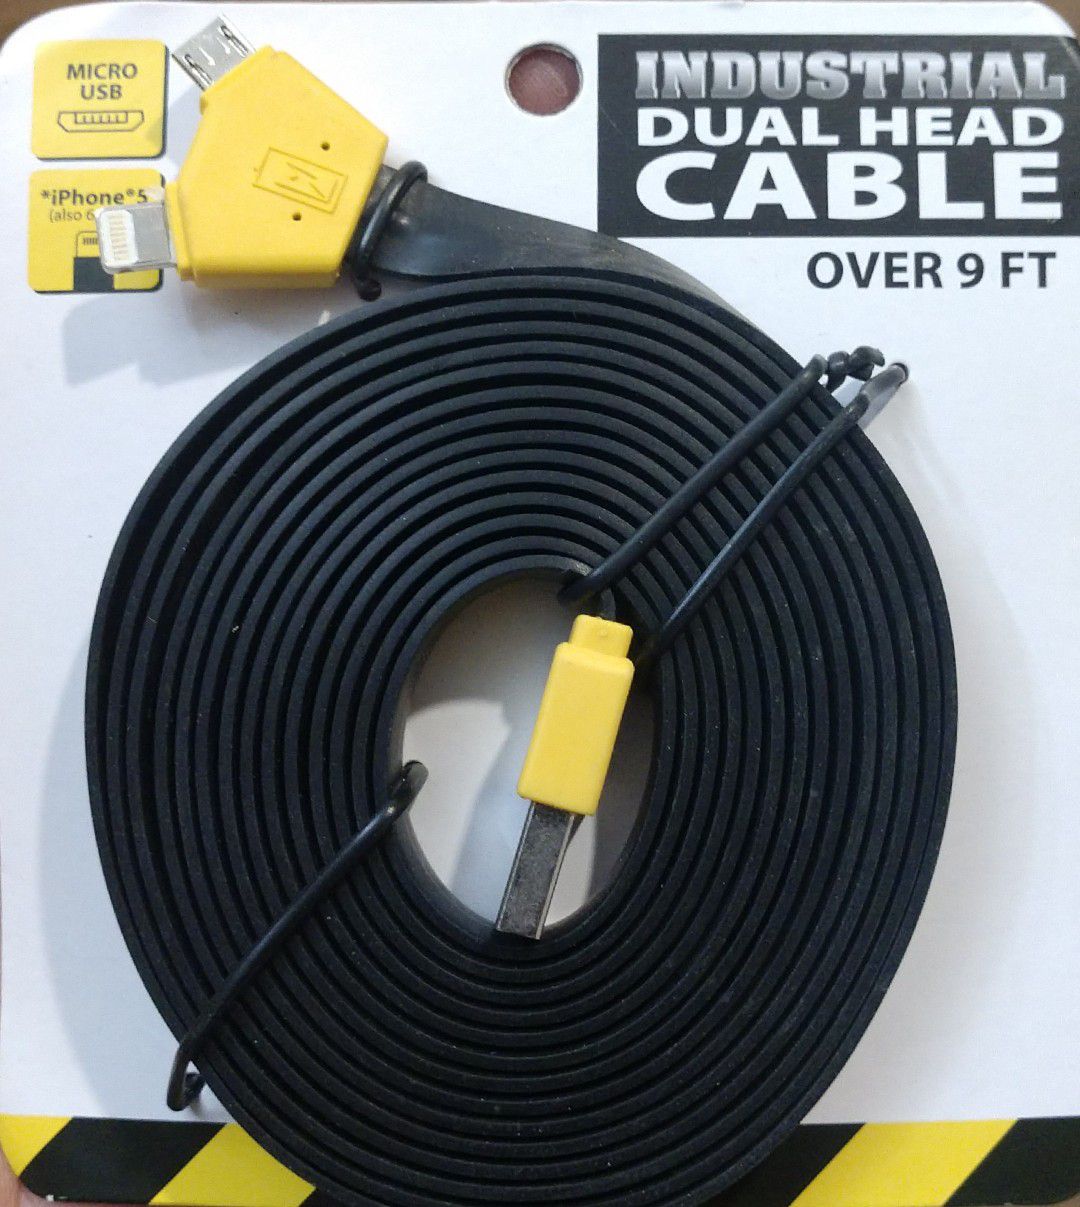 New 9 foot micro and ipad charger cable